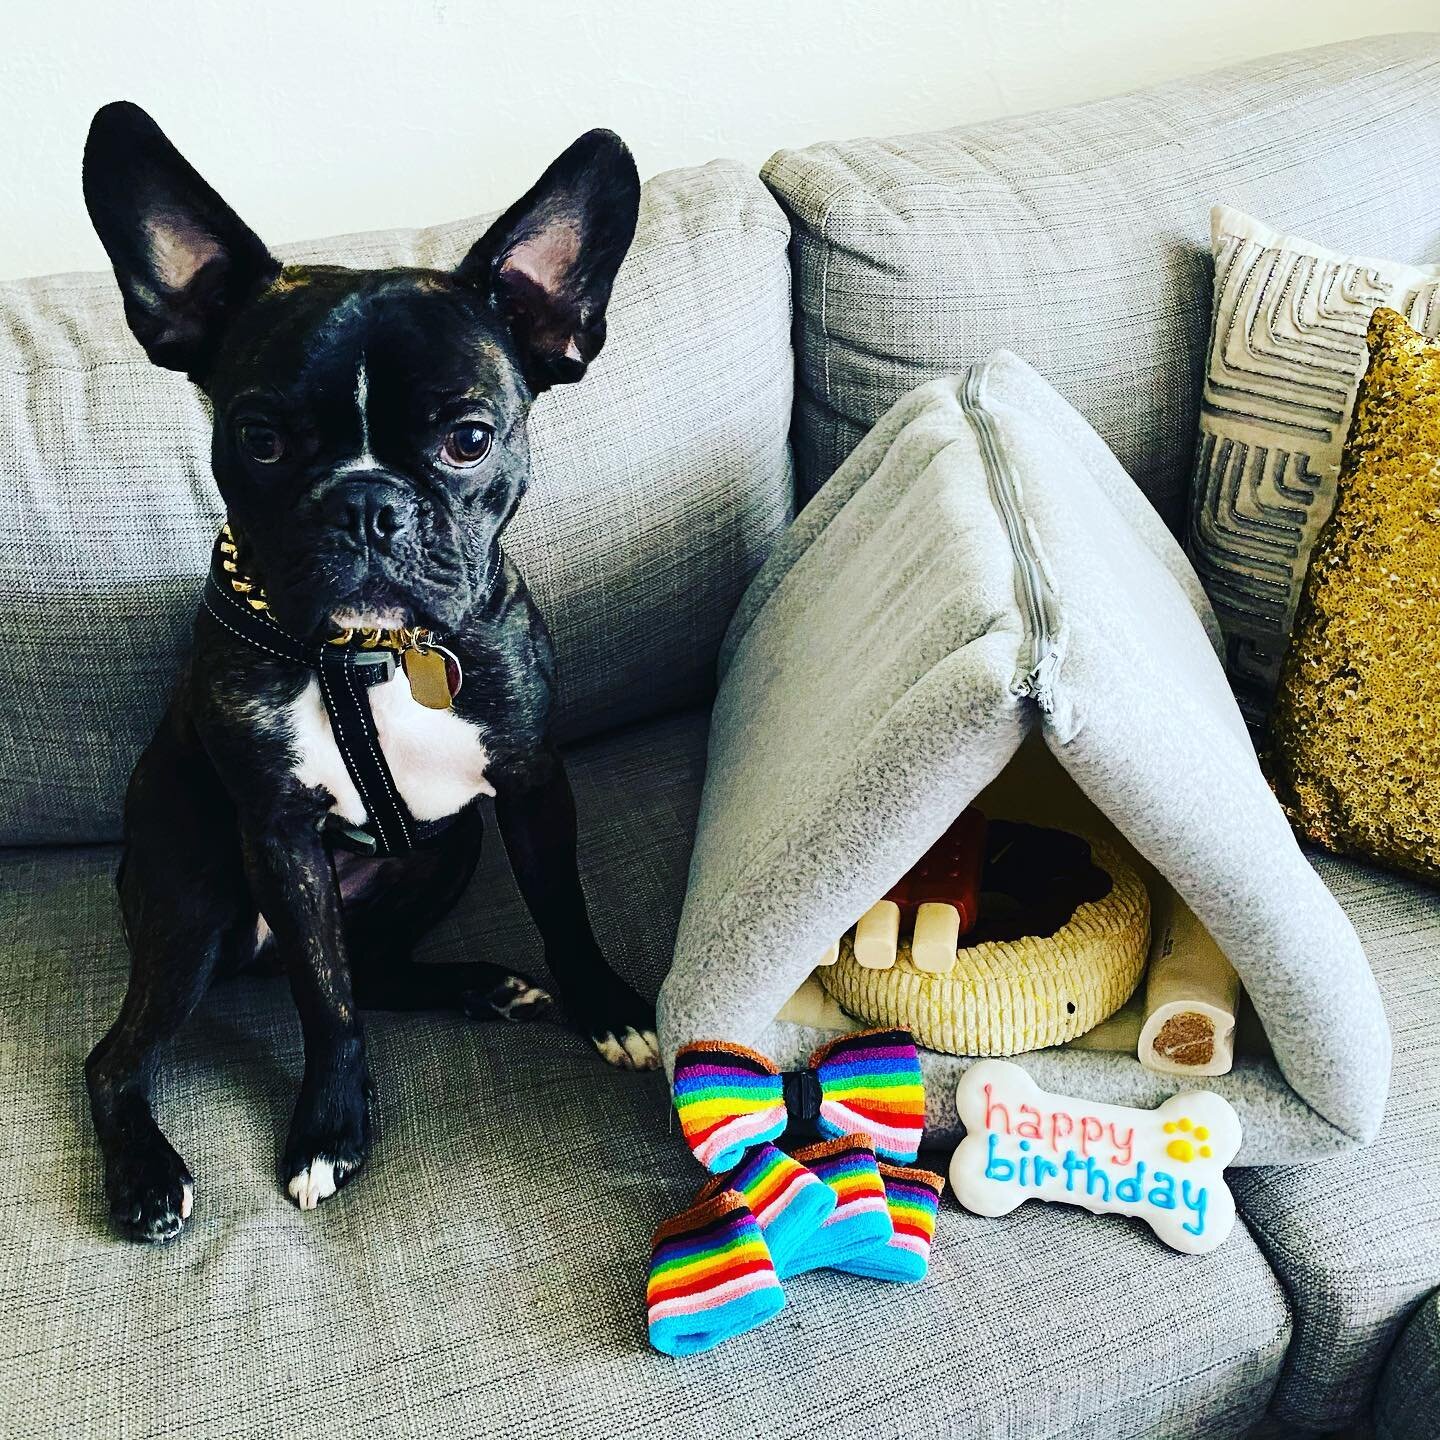 Happy 1st birthday to our pandemic puppy, Frank! He&rsquo;s the smoooooooshiest!
#frenchie #frenchbulldog #bostonterrier #frenchtonsofinstagram #thesweetest #puppiesofinstagram #puppylove